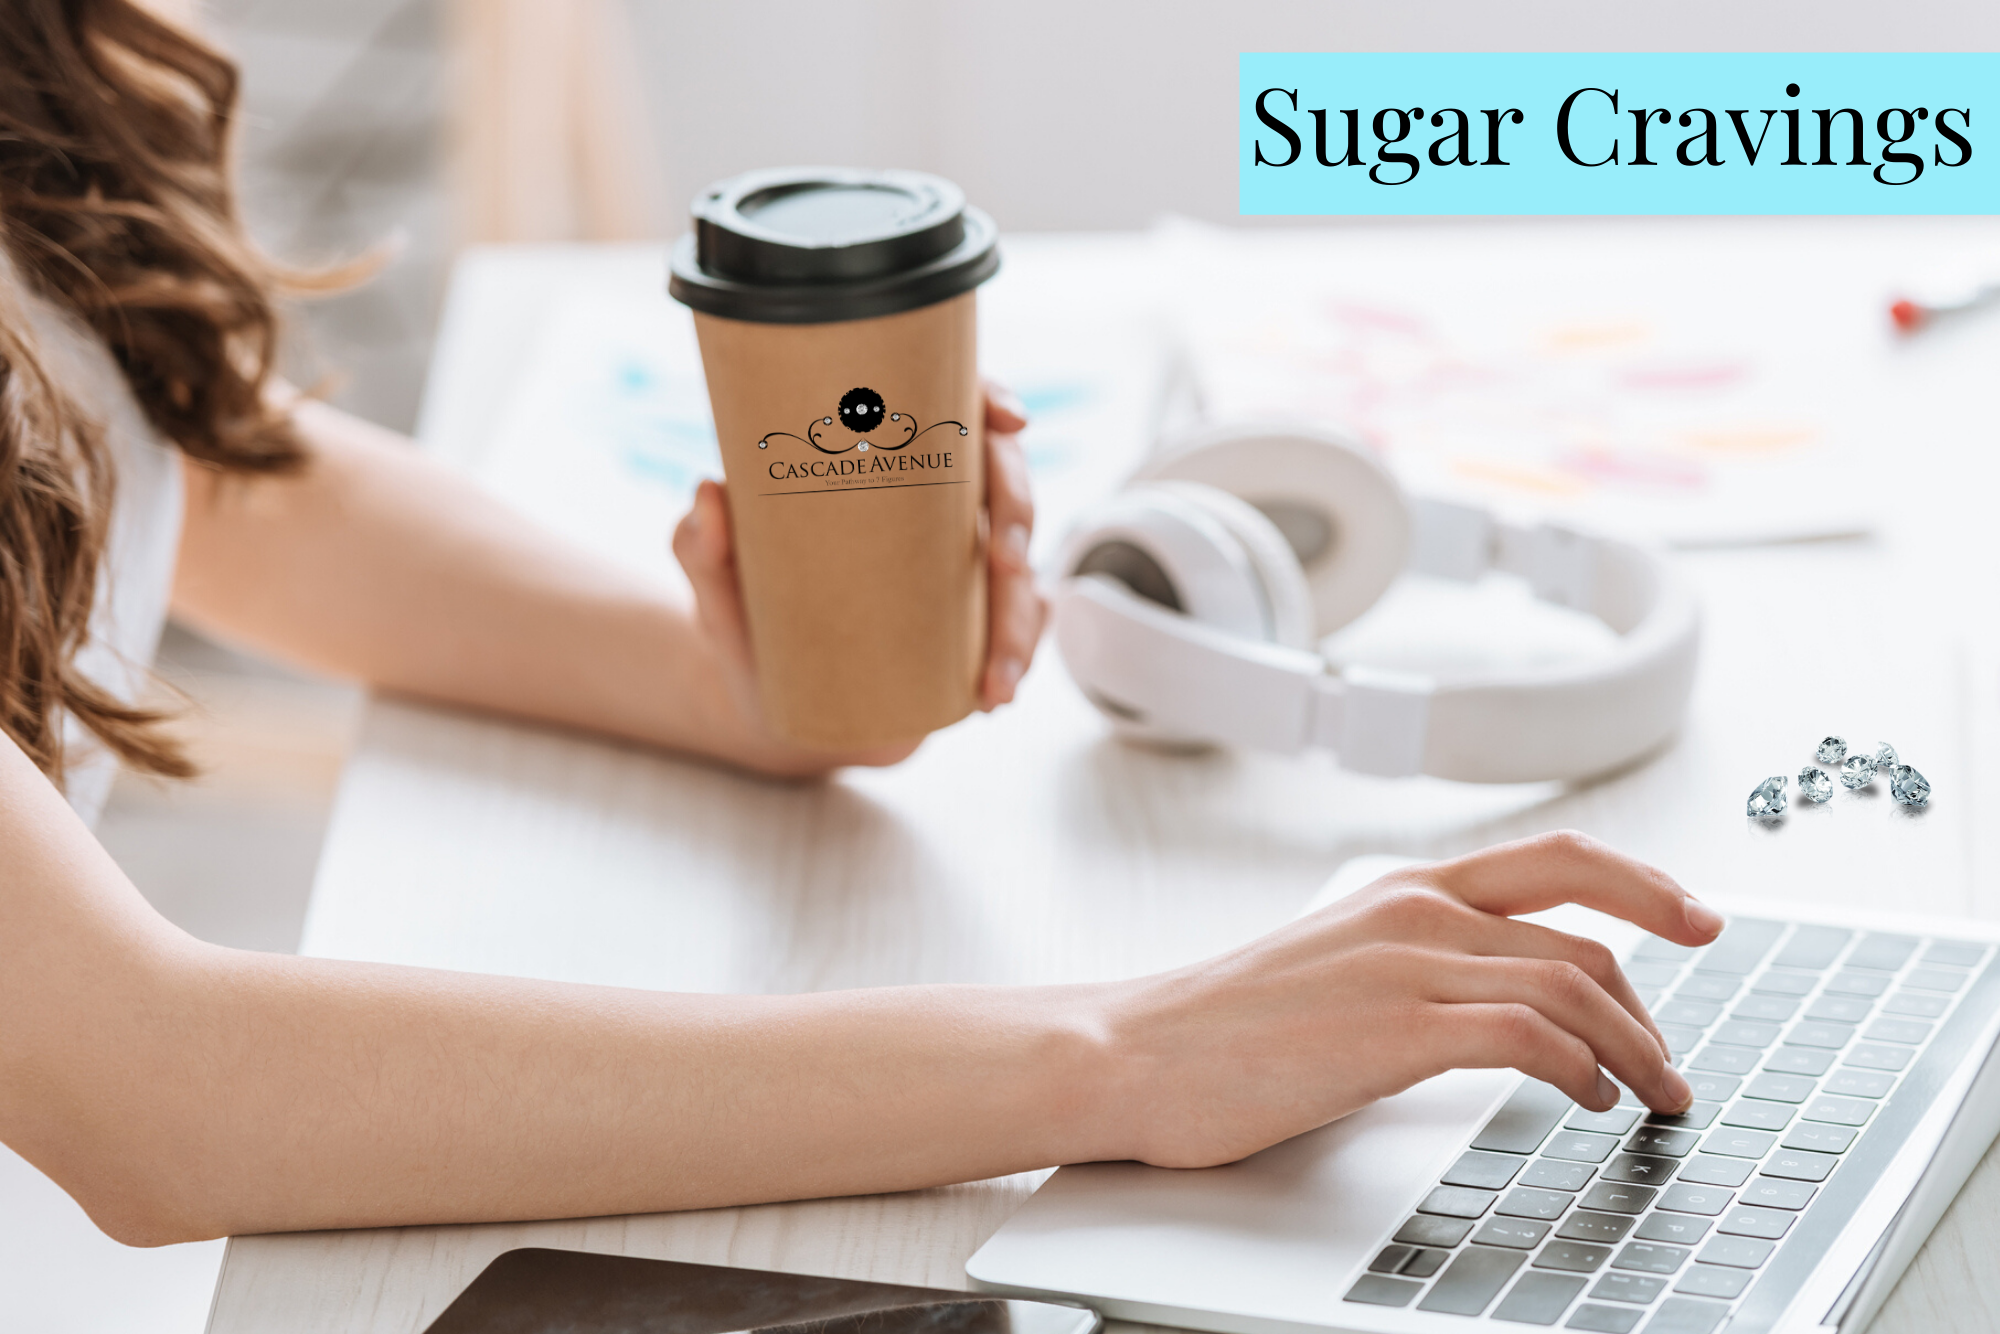 sugar addiction detox: How to Prevent Your Afternoon Sugar Cravings and Energy Crash!